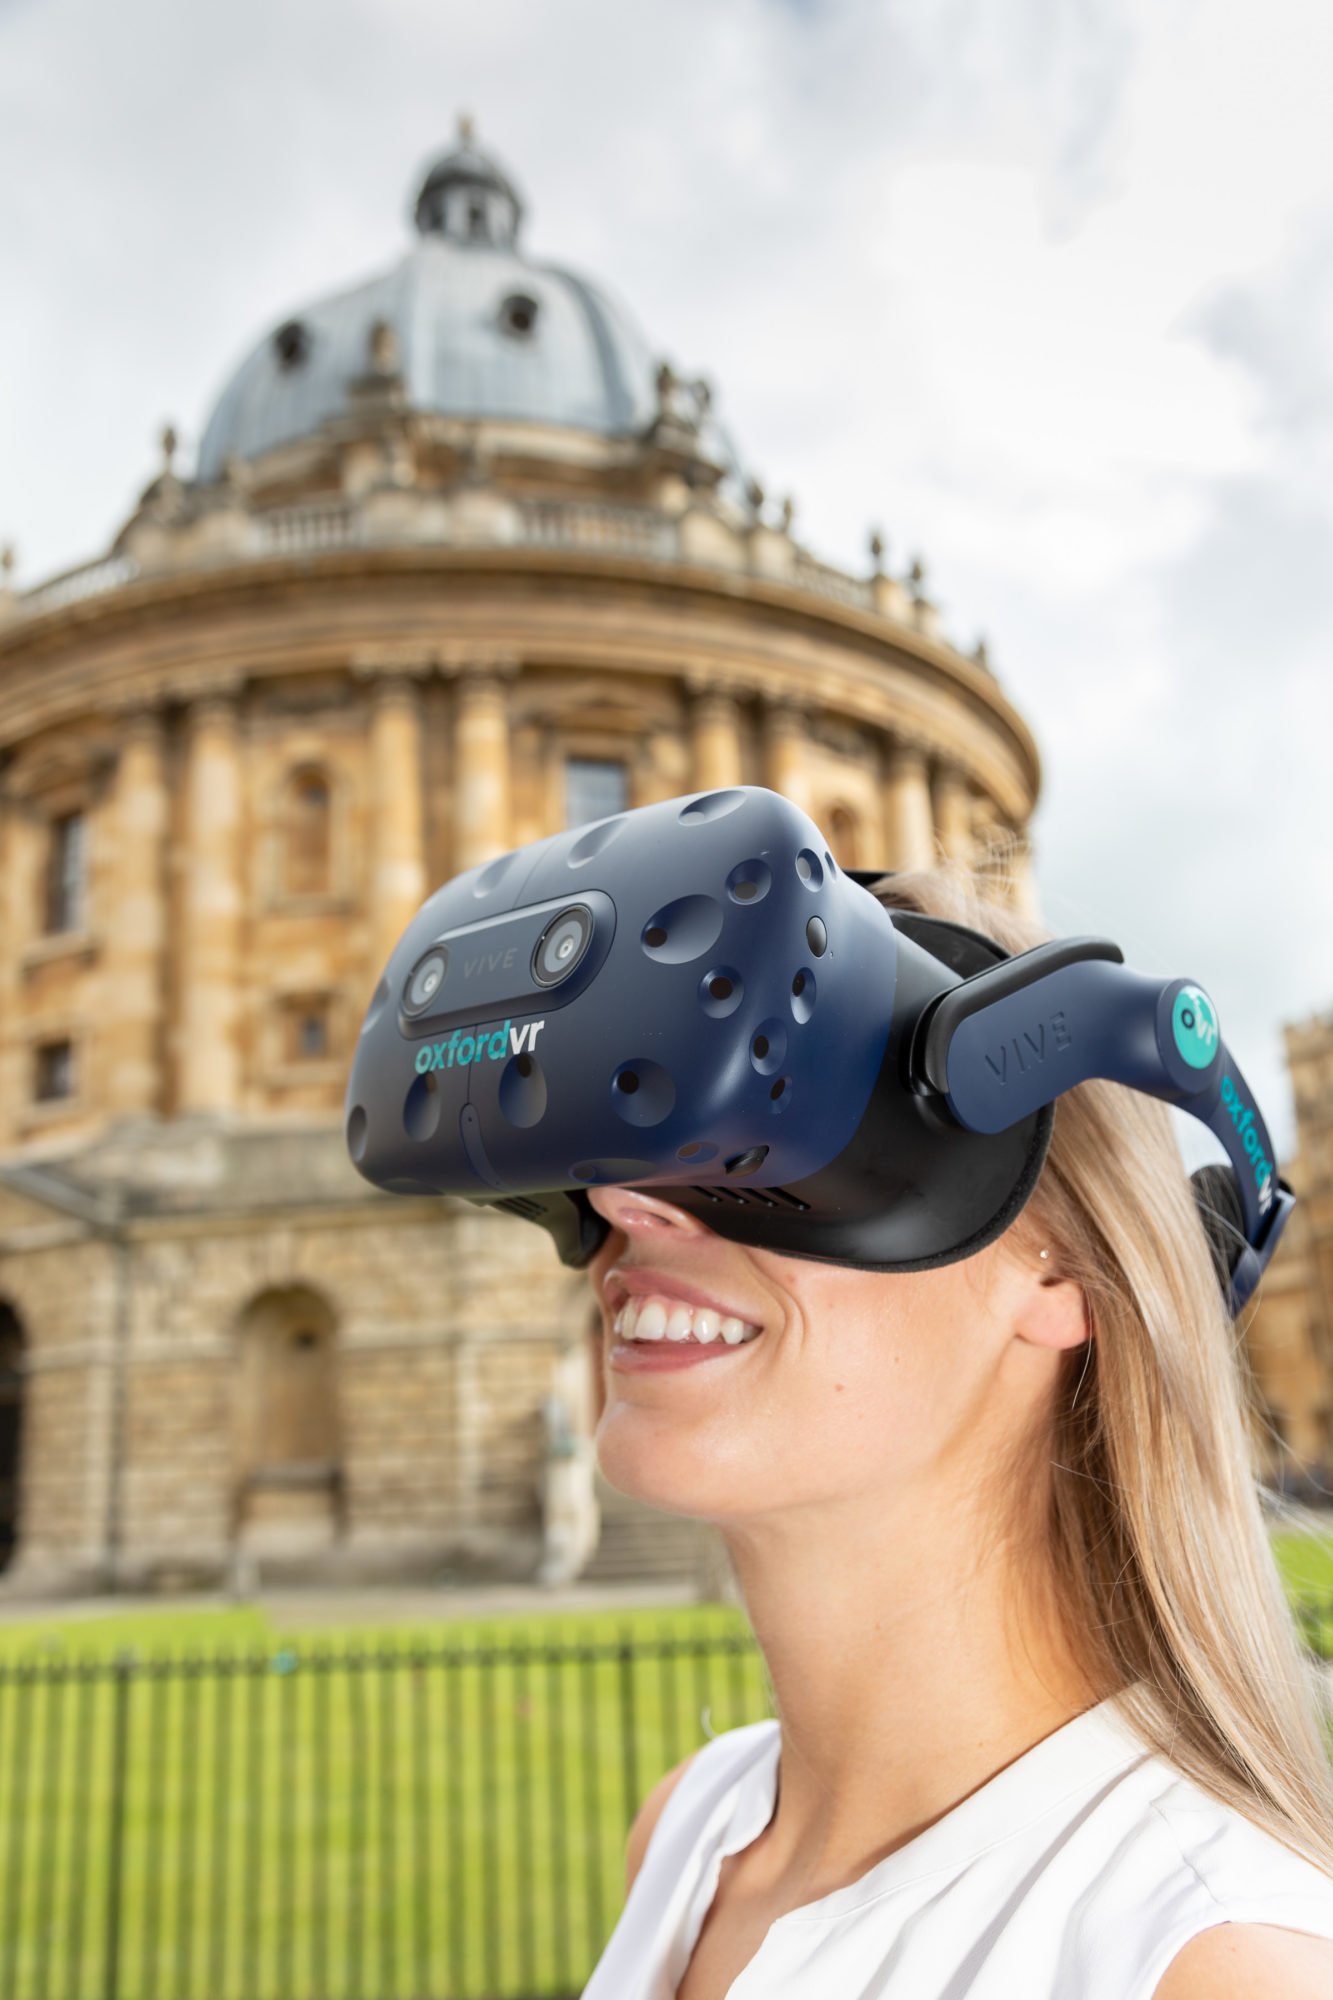 Oxford VR announced winners in MedTech Visionaries Awards